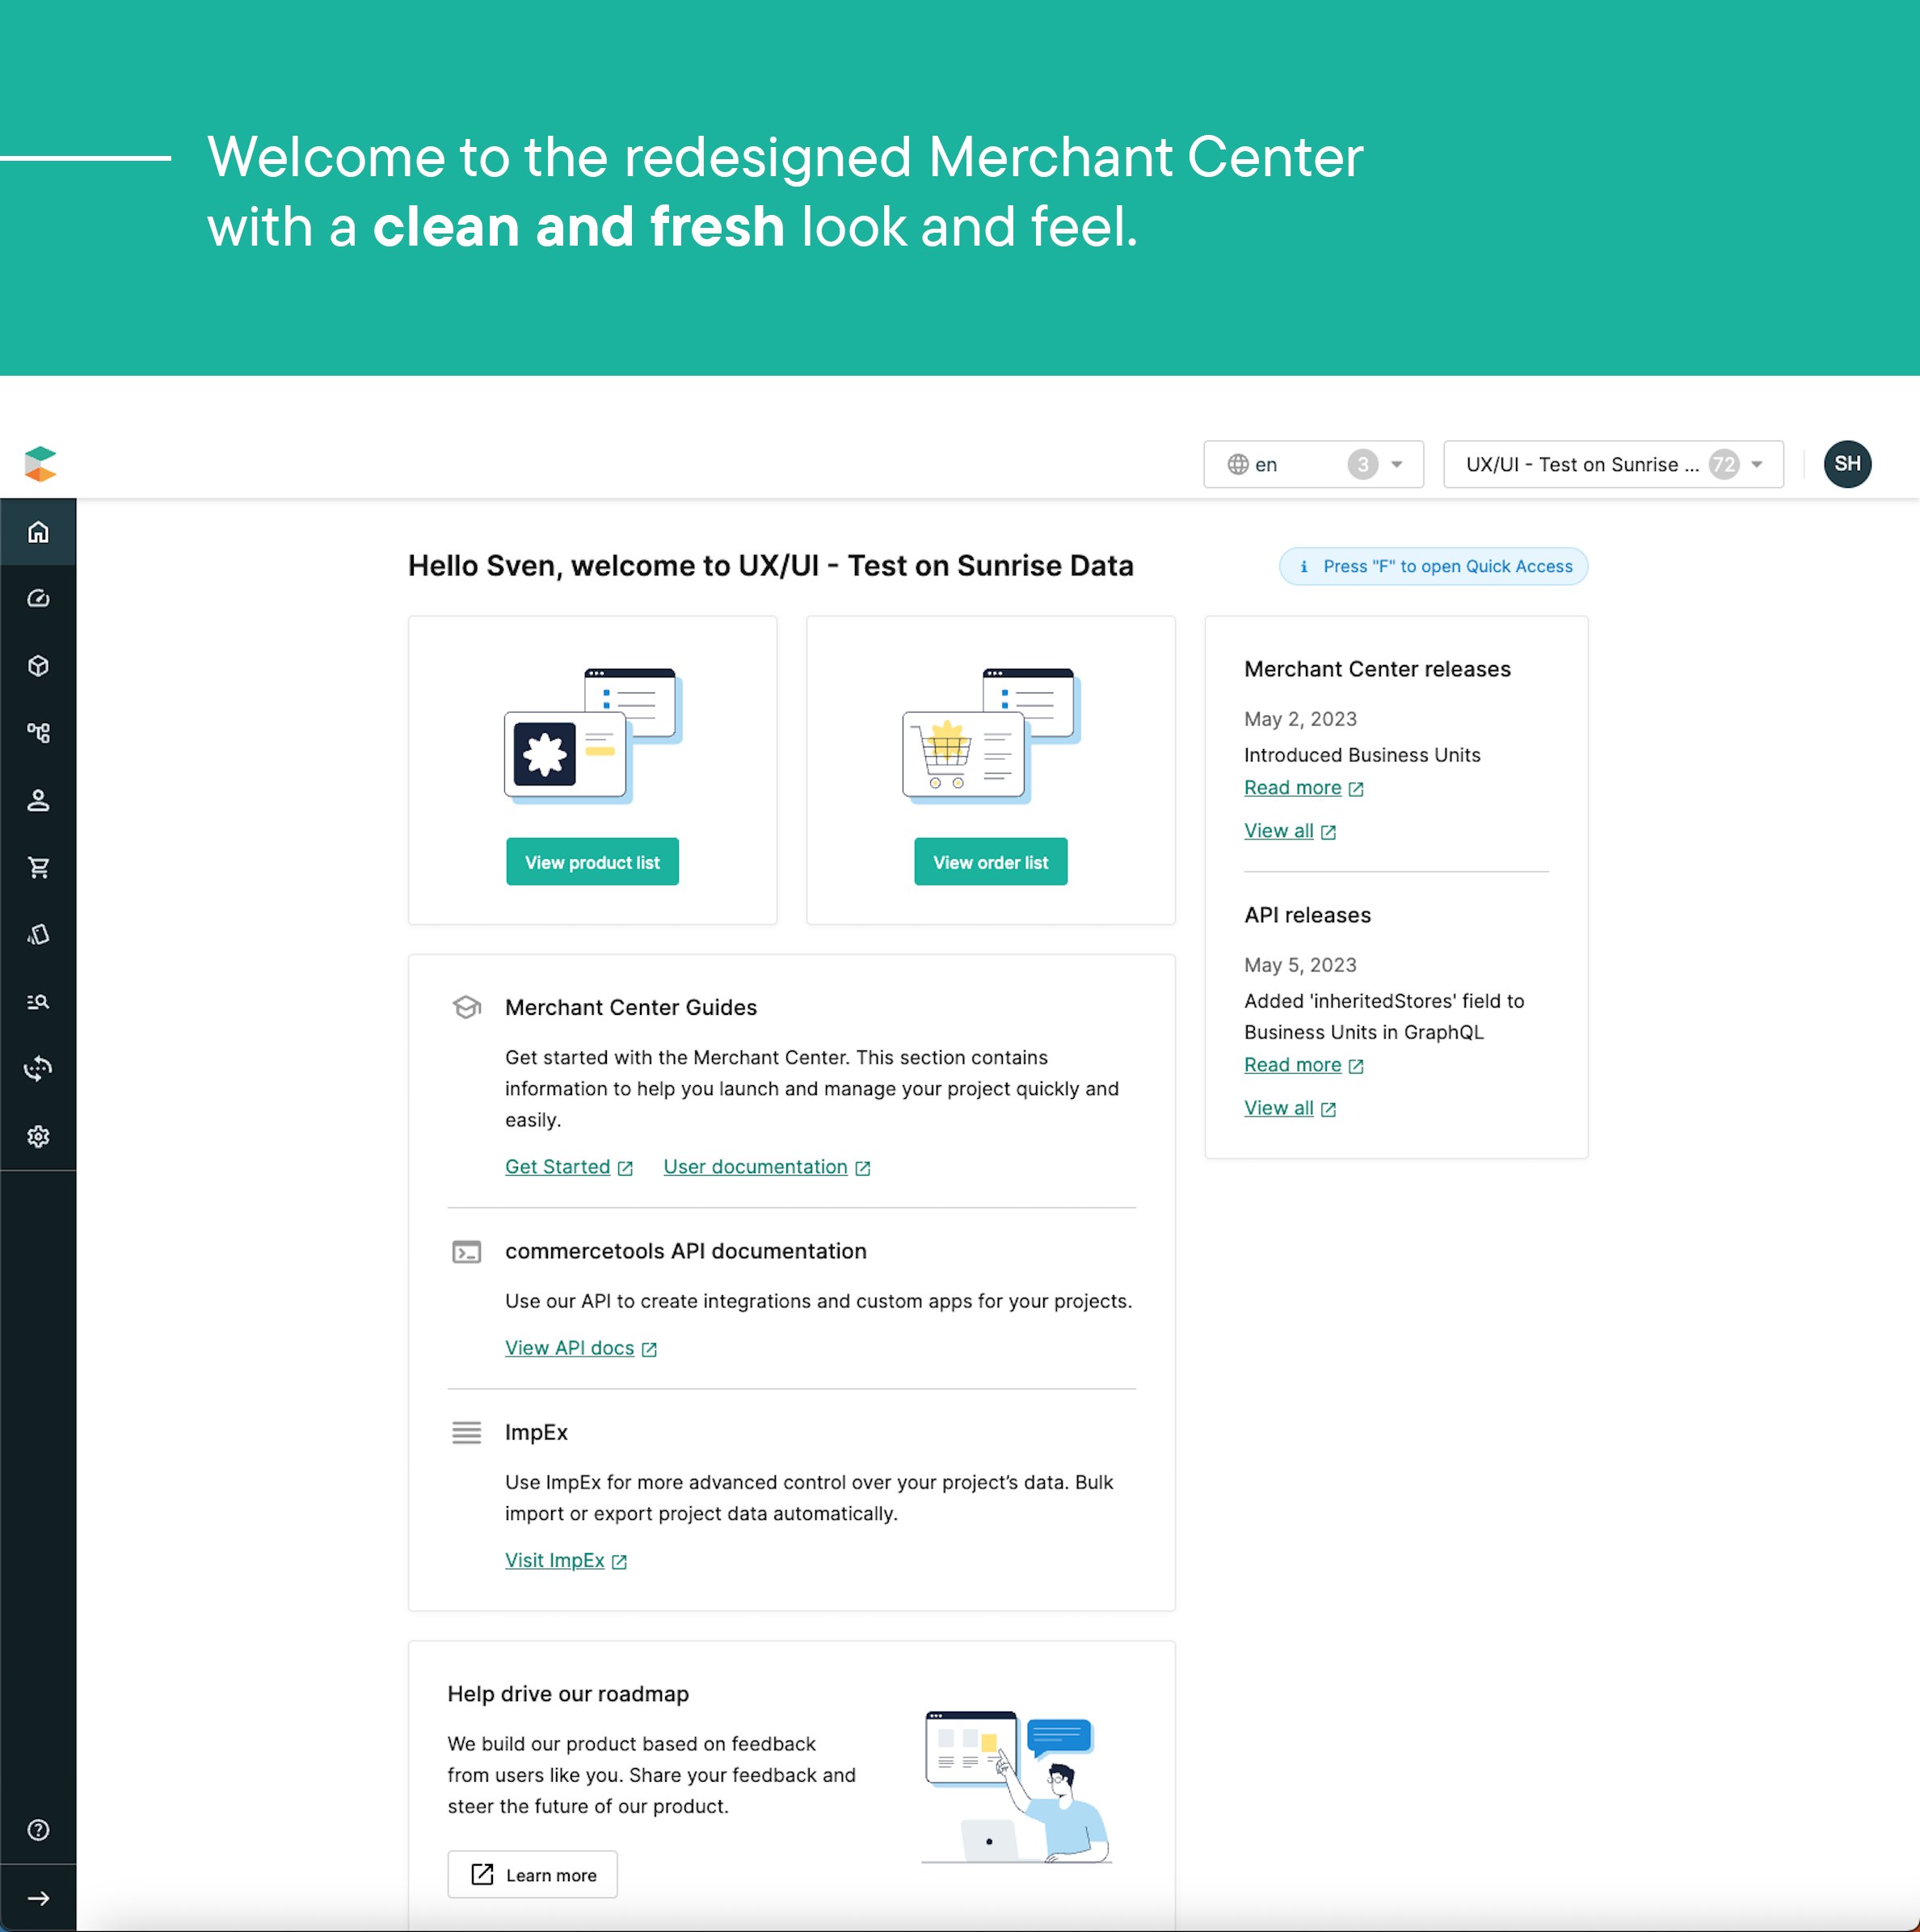 An overview of the redesigned Merchant Center by commercetools